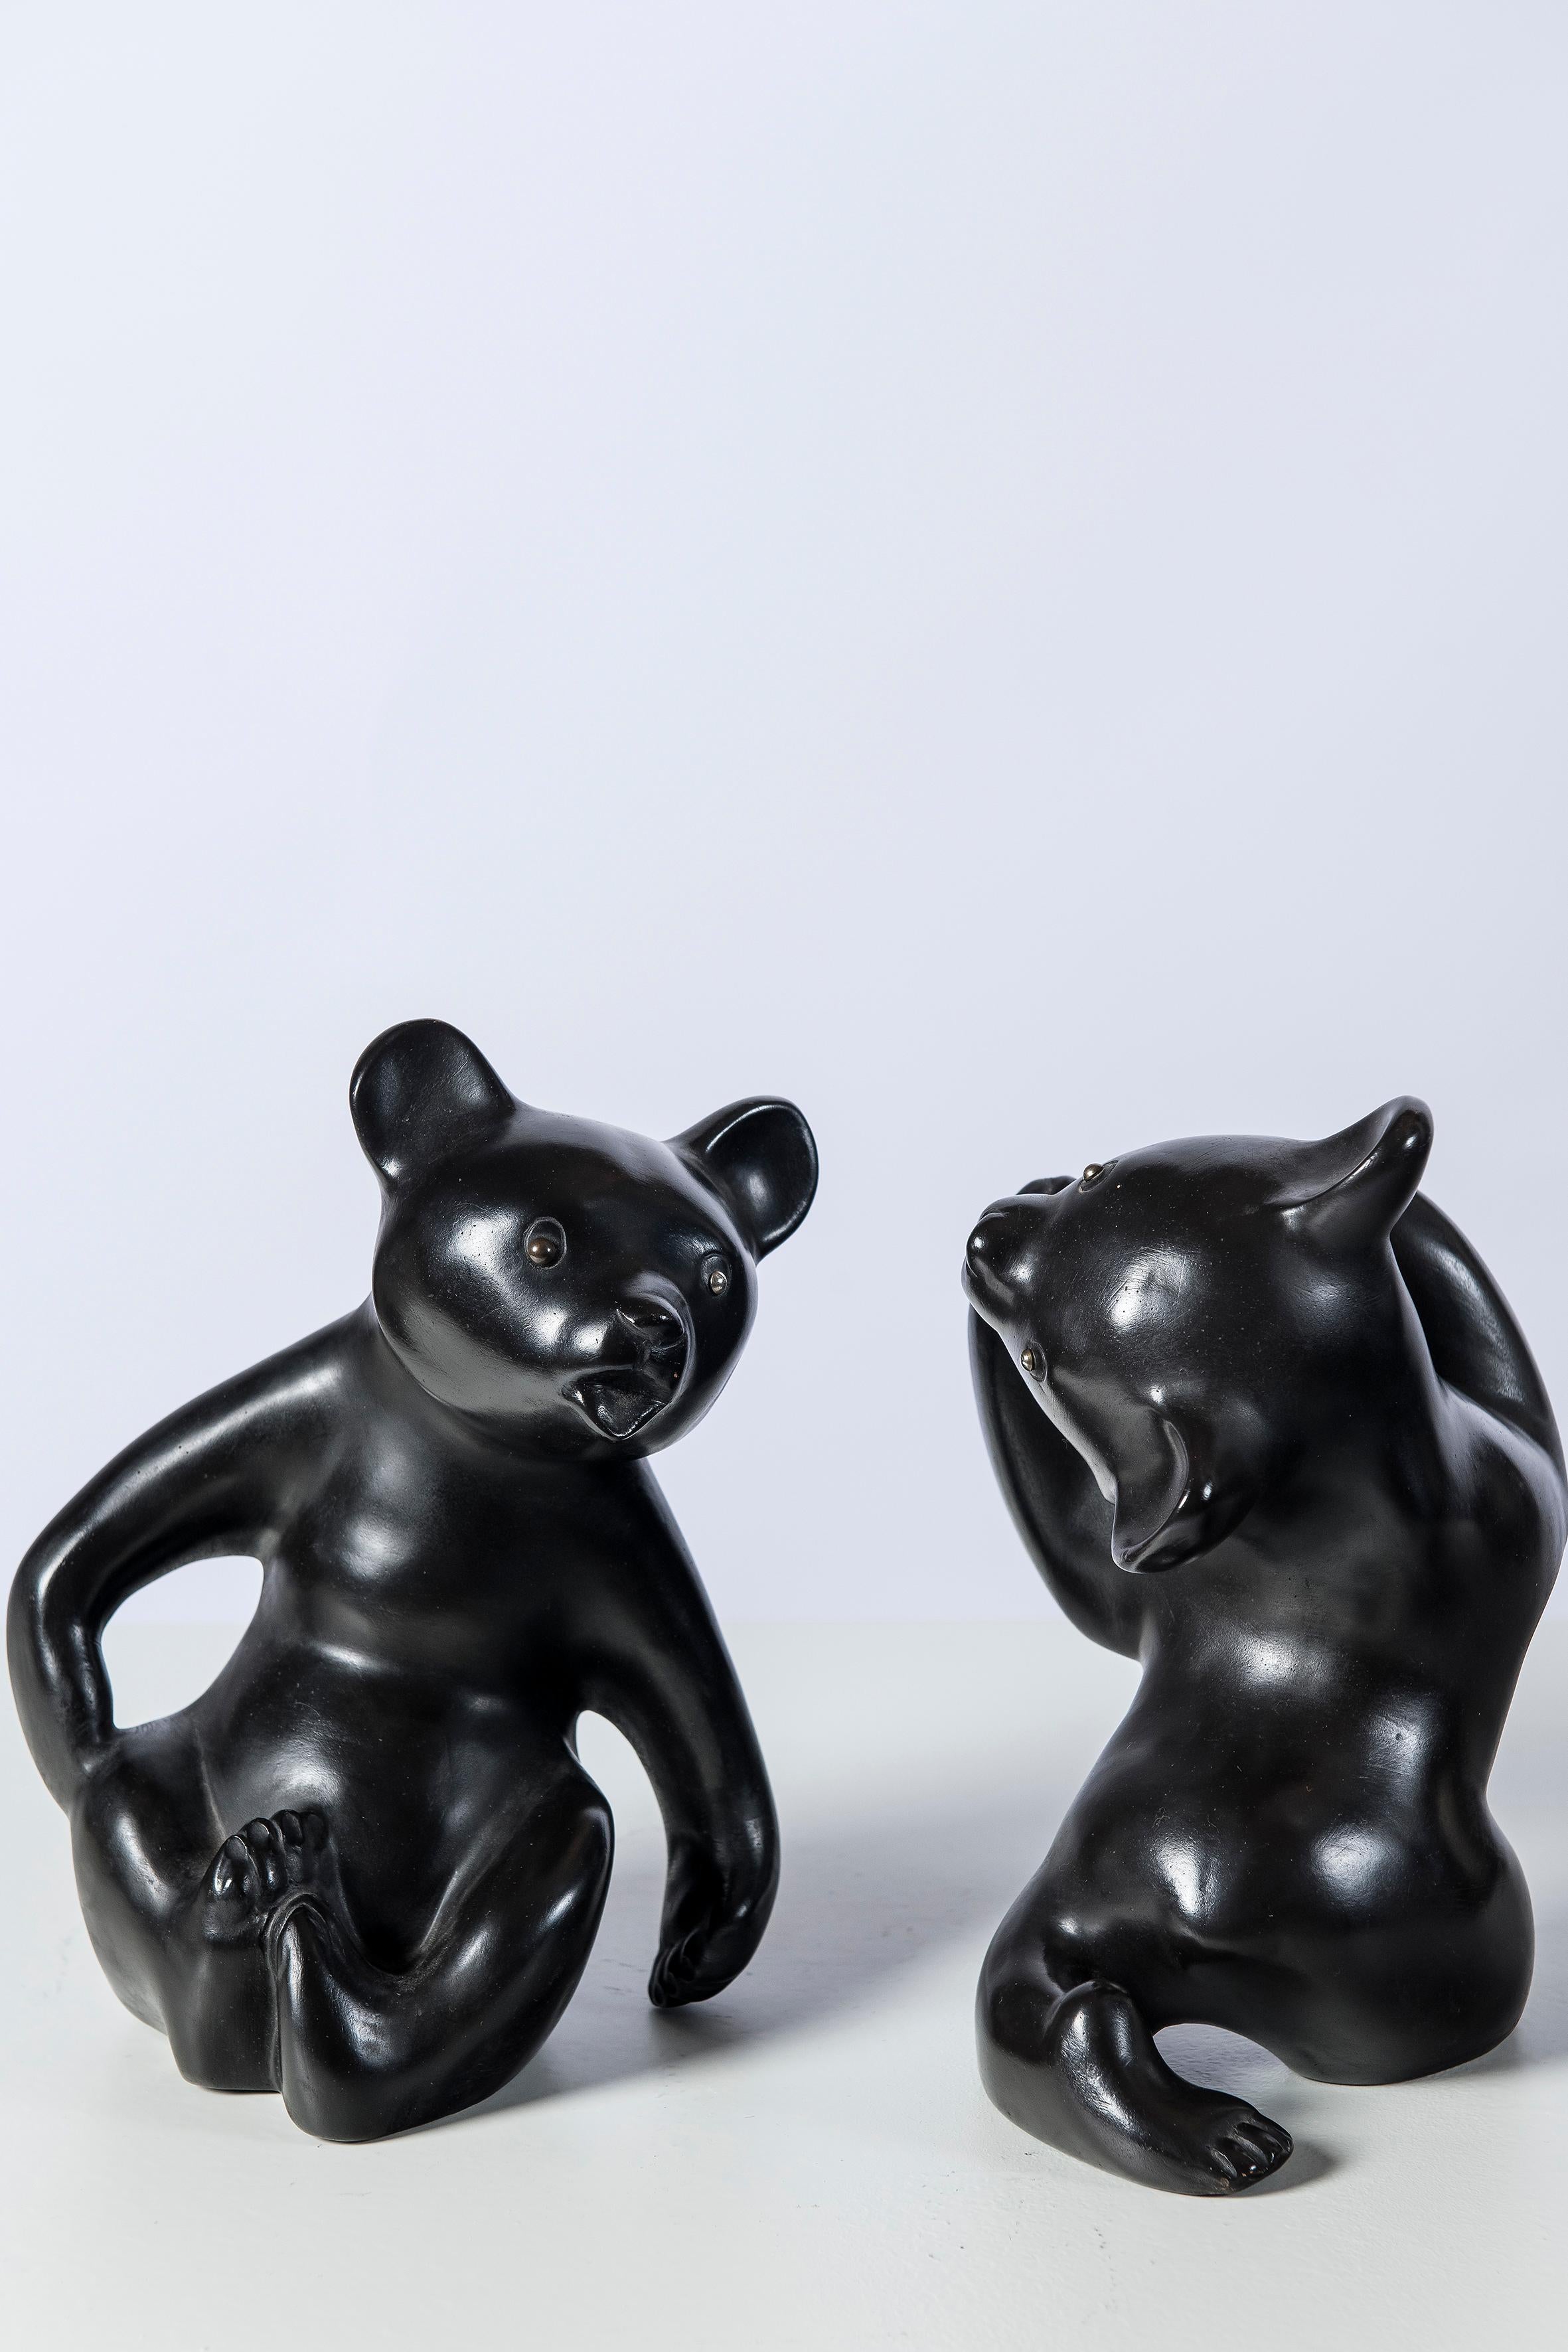 Pair of ceramic bears bookends, signed Vienna. By Leopold Anzengruber, 1955.
They appear in the book of Leopold Anzengruber, 